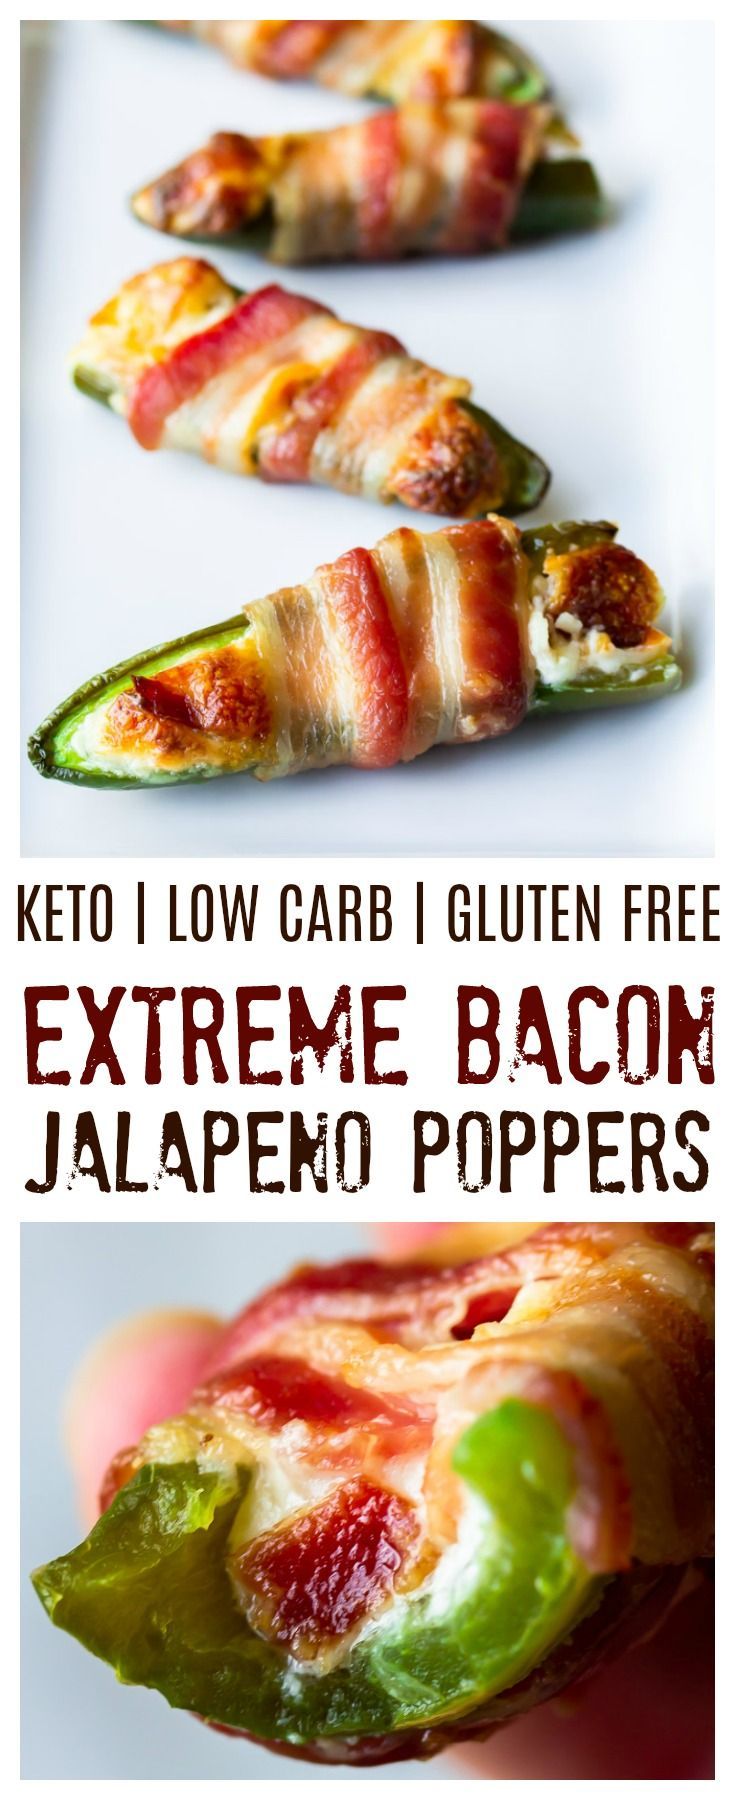 Extreme Bacon Jalapeno Poppers Recipe -   14 diet Low Carb bacon ideas